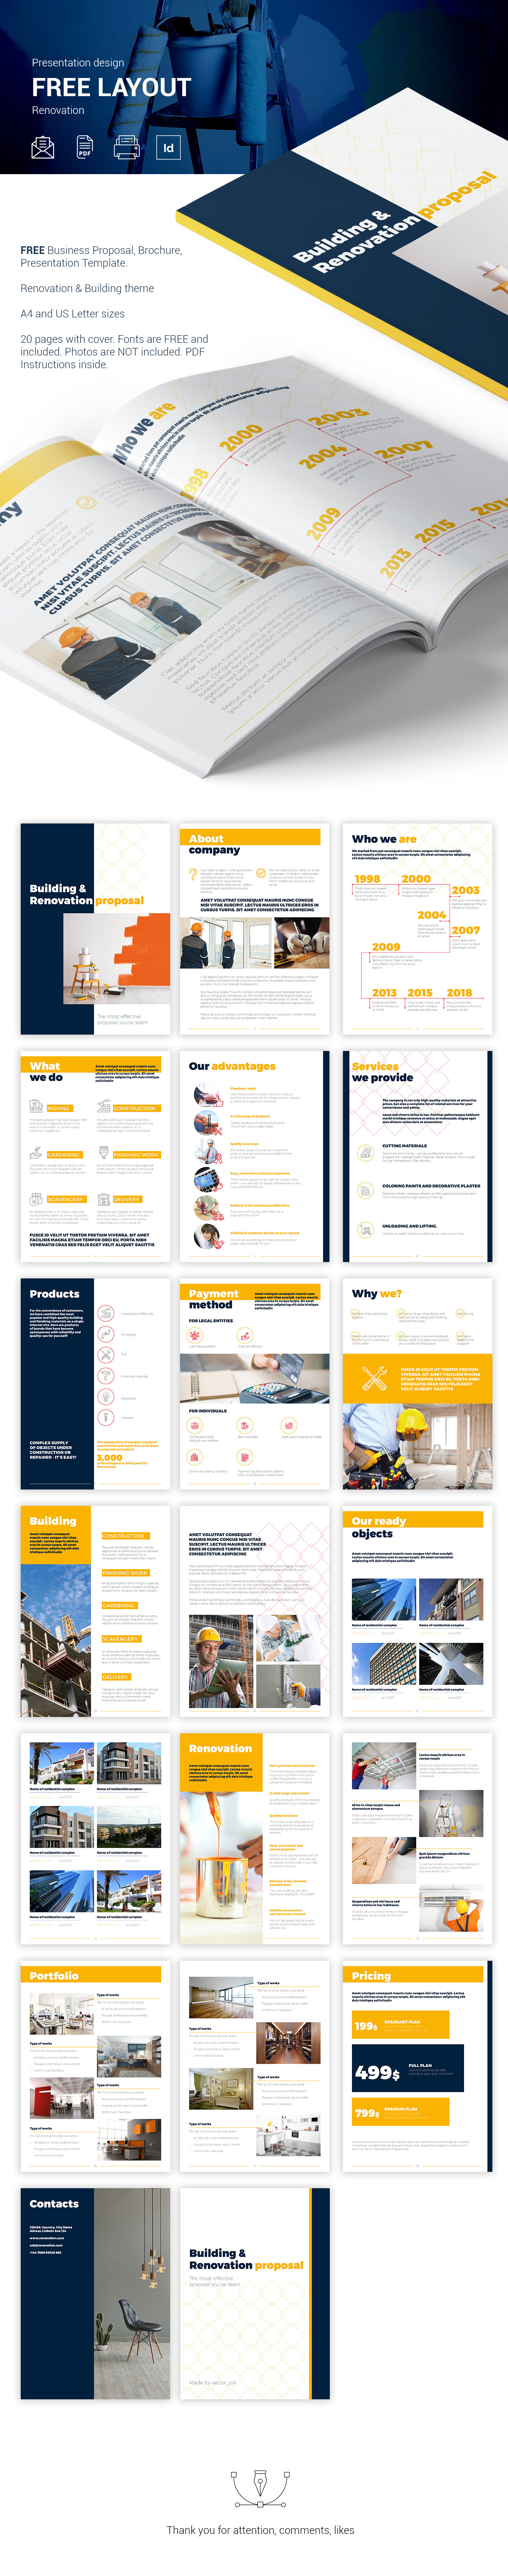 Adobe InDesign business Business Proposal proposal presentation template free free design free display Layout free presentation template